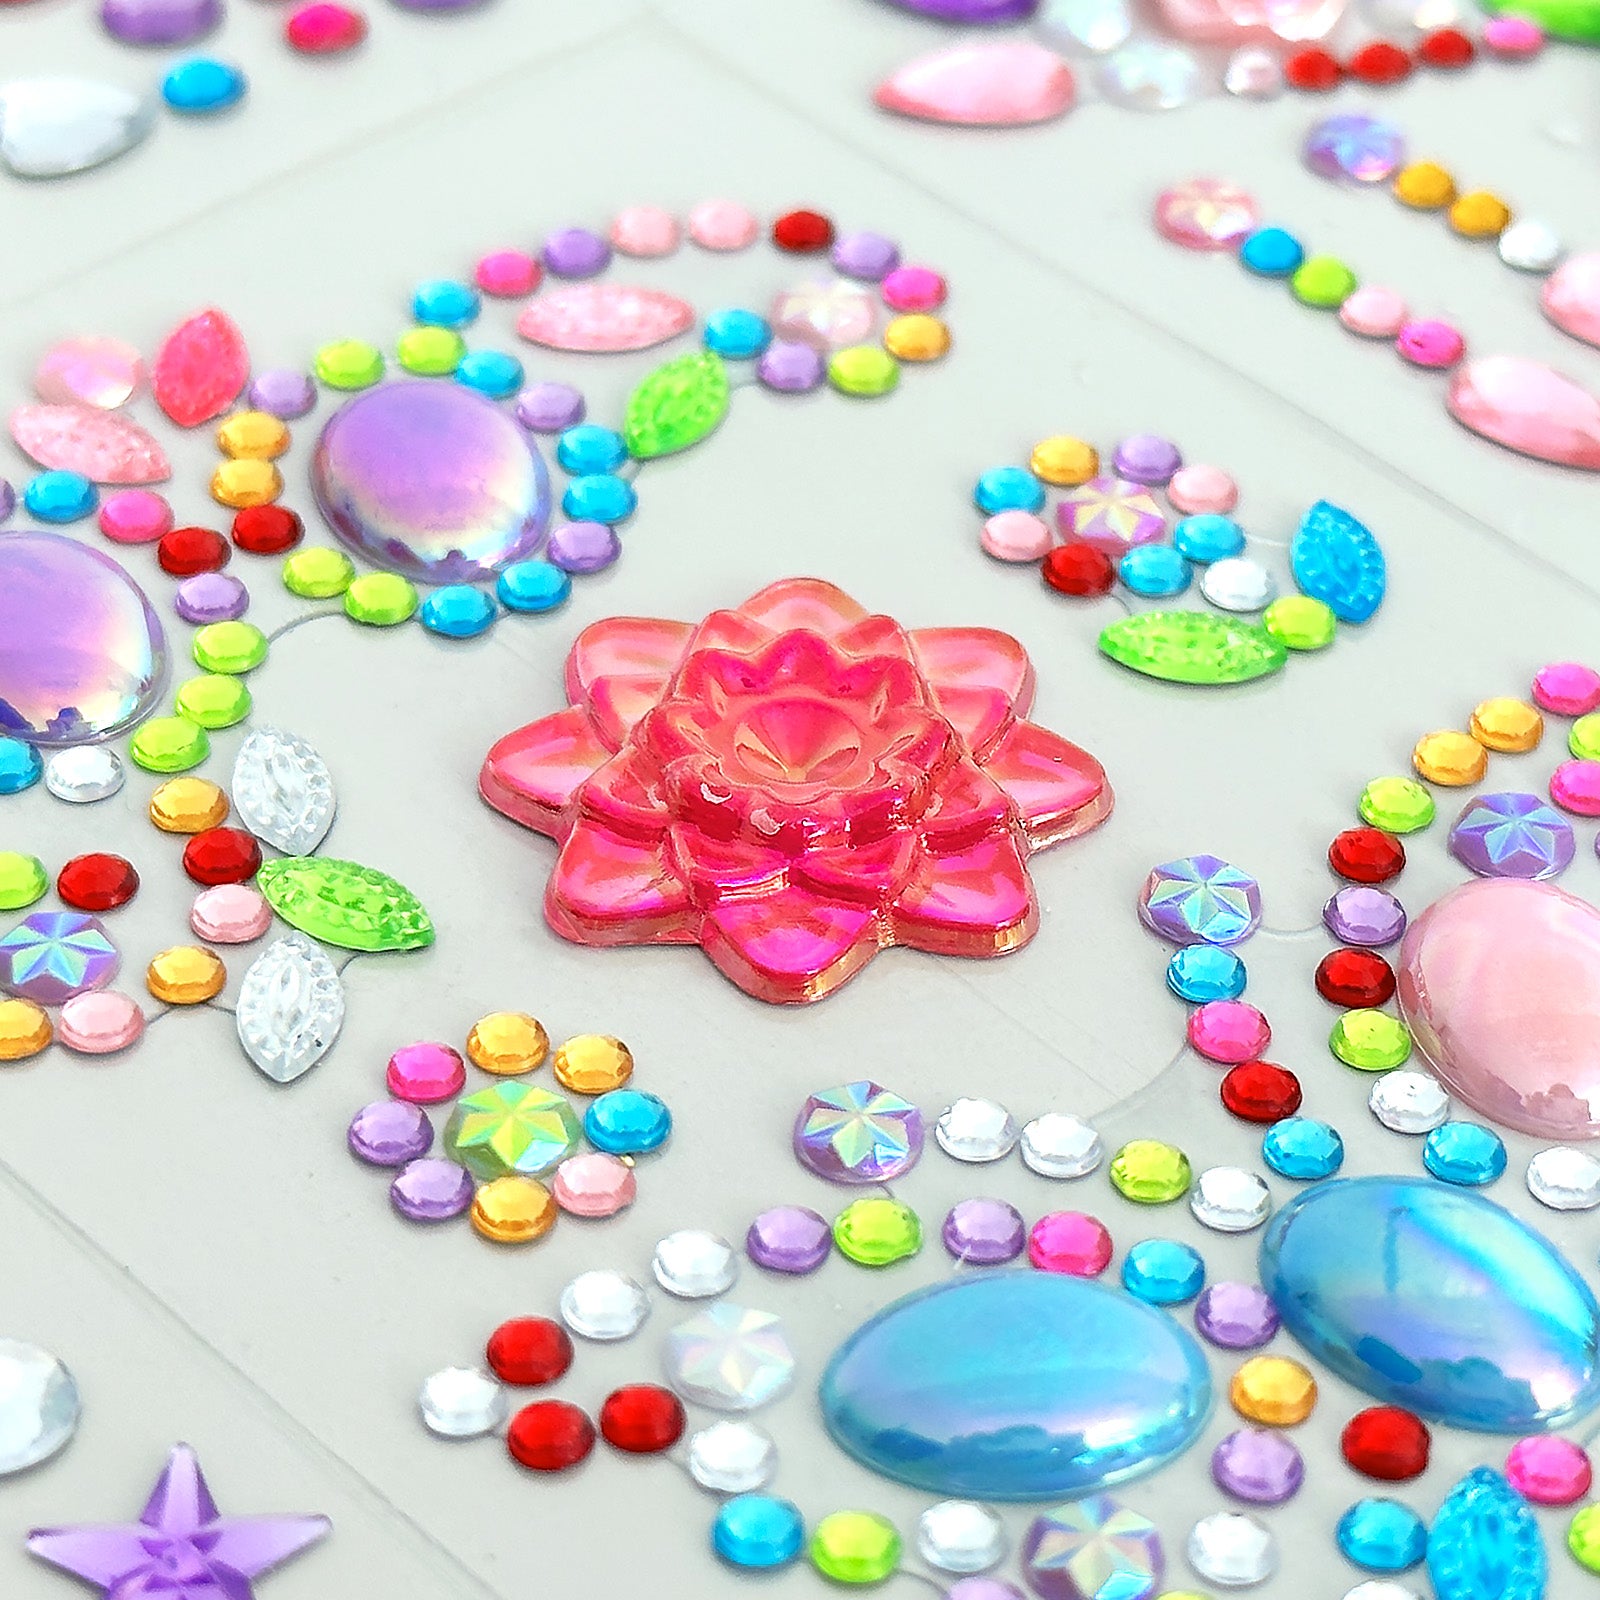 Self-adhesive Acrylic Crystal Rhinestone Jewels Gems Sticker Sheets  Assorted Colors Various Shapes (Multicolor Type 2)